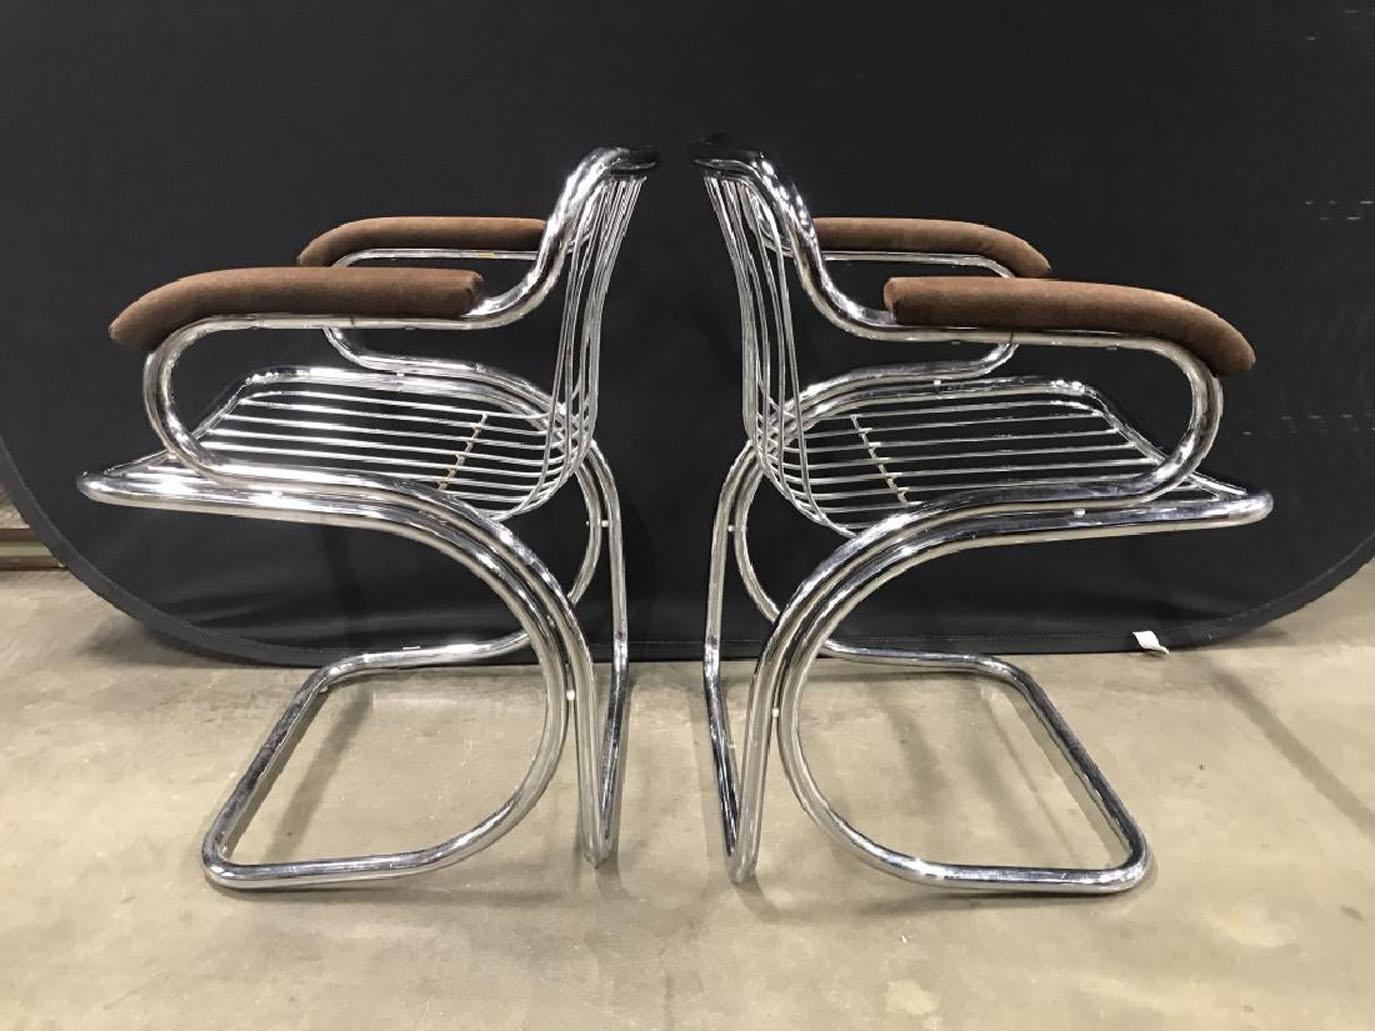 1970s Italian Gastone Rinaldi Cantilever tubular chrome armchairs with upholstered arm pads, some slight pitting to chrome. Search terms: Jerry Johnson style chairs, vintage 1970s chrome chairs, Tubular chrome armchairs, vintage chrome armchairs,